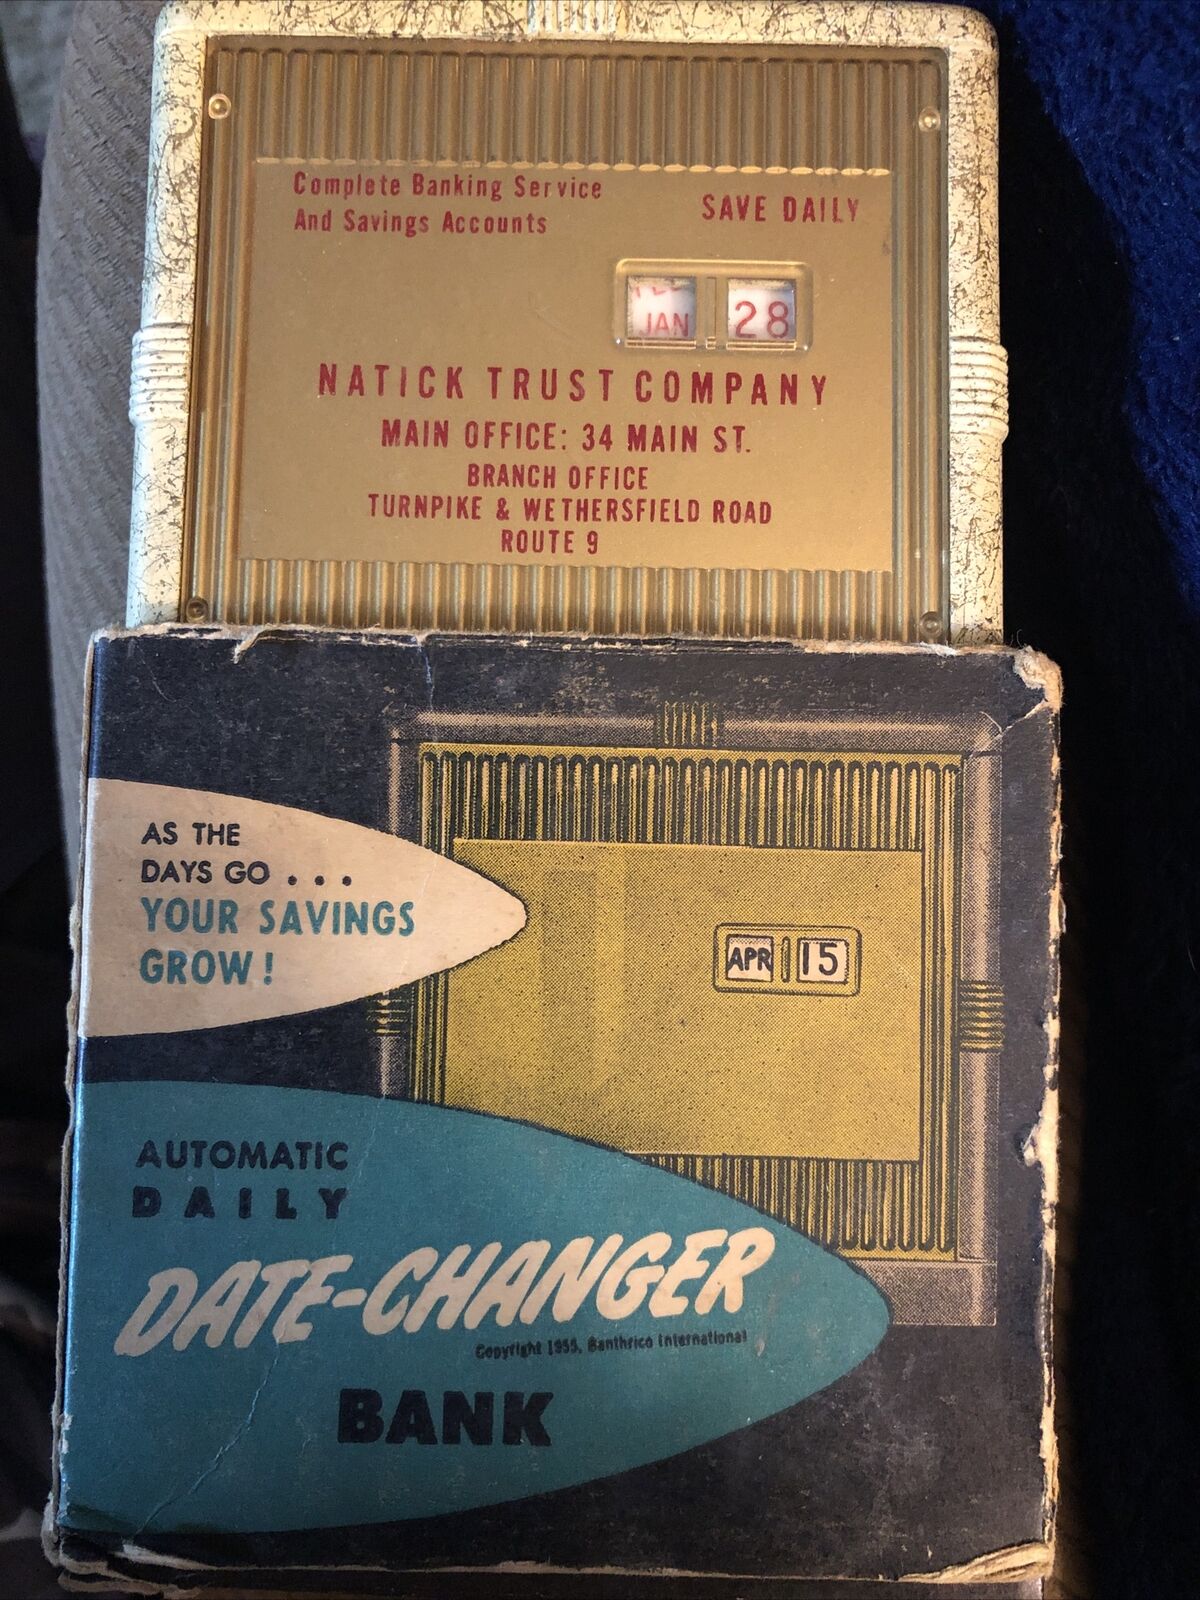 1955 Automatic Daily Date-Changer Bank & Orig Box Natick Trust No Key Sorry